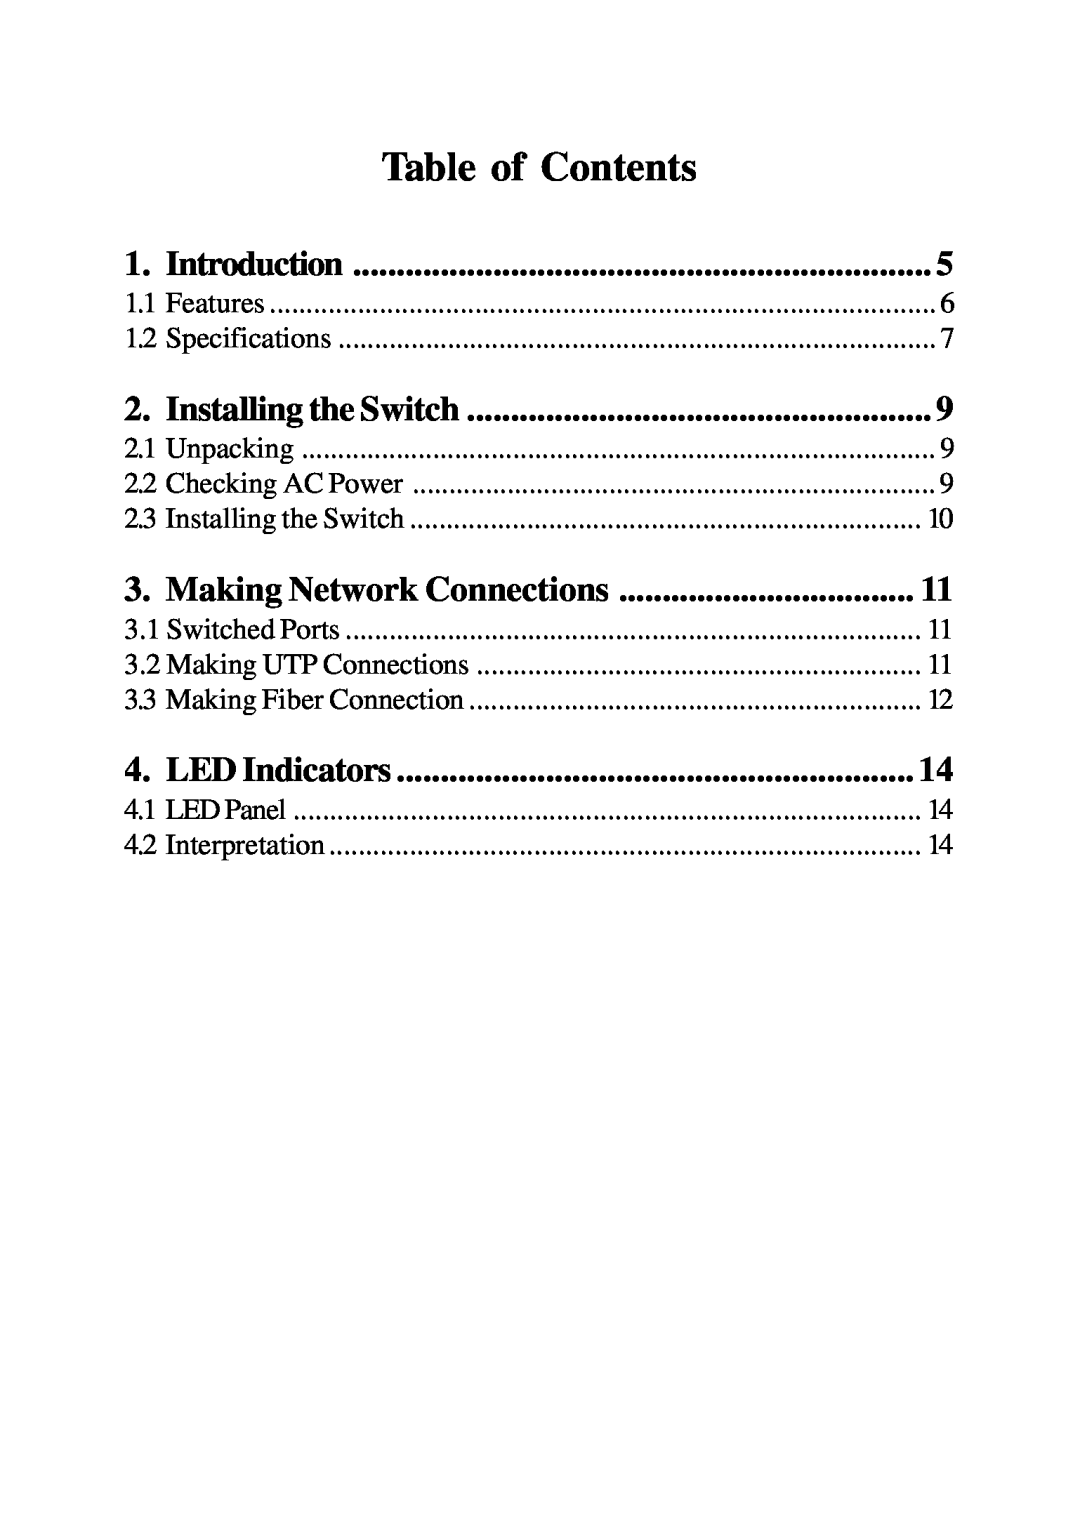 KTI Networks KS-108F manual Making Network Connections, LED Indicators, Table of Contents, Installing the Switch 